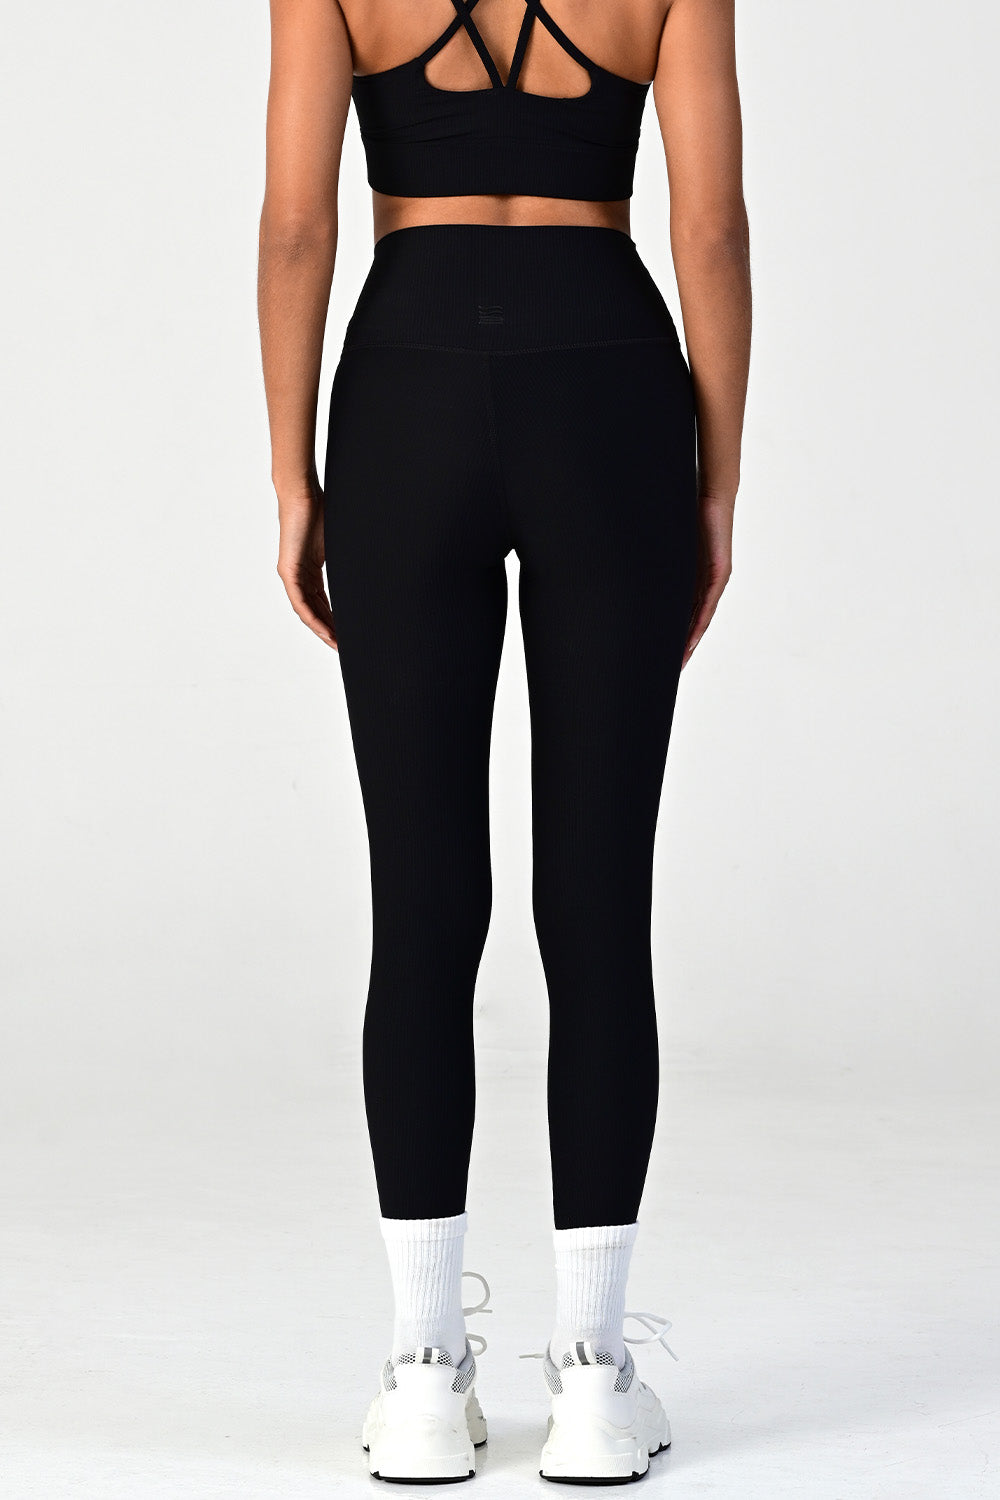 Woman wearing the melrose black ribbed leggings close up back view